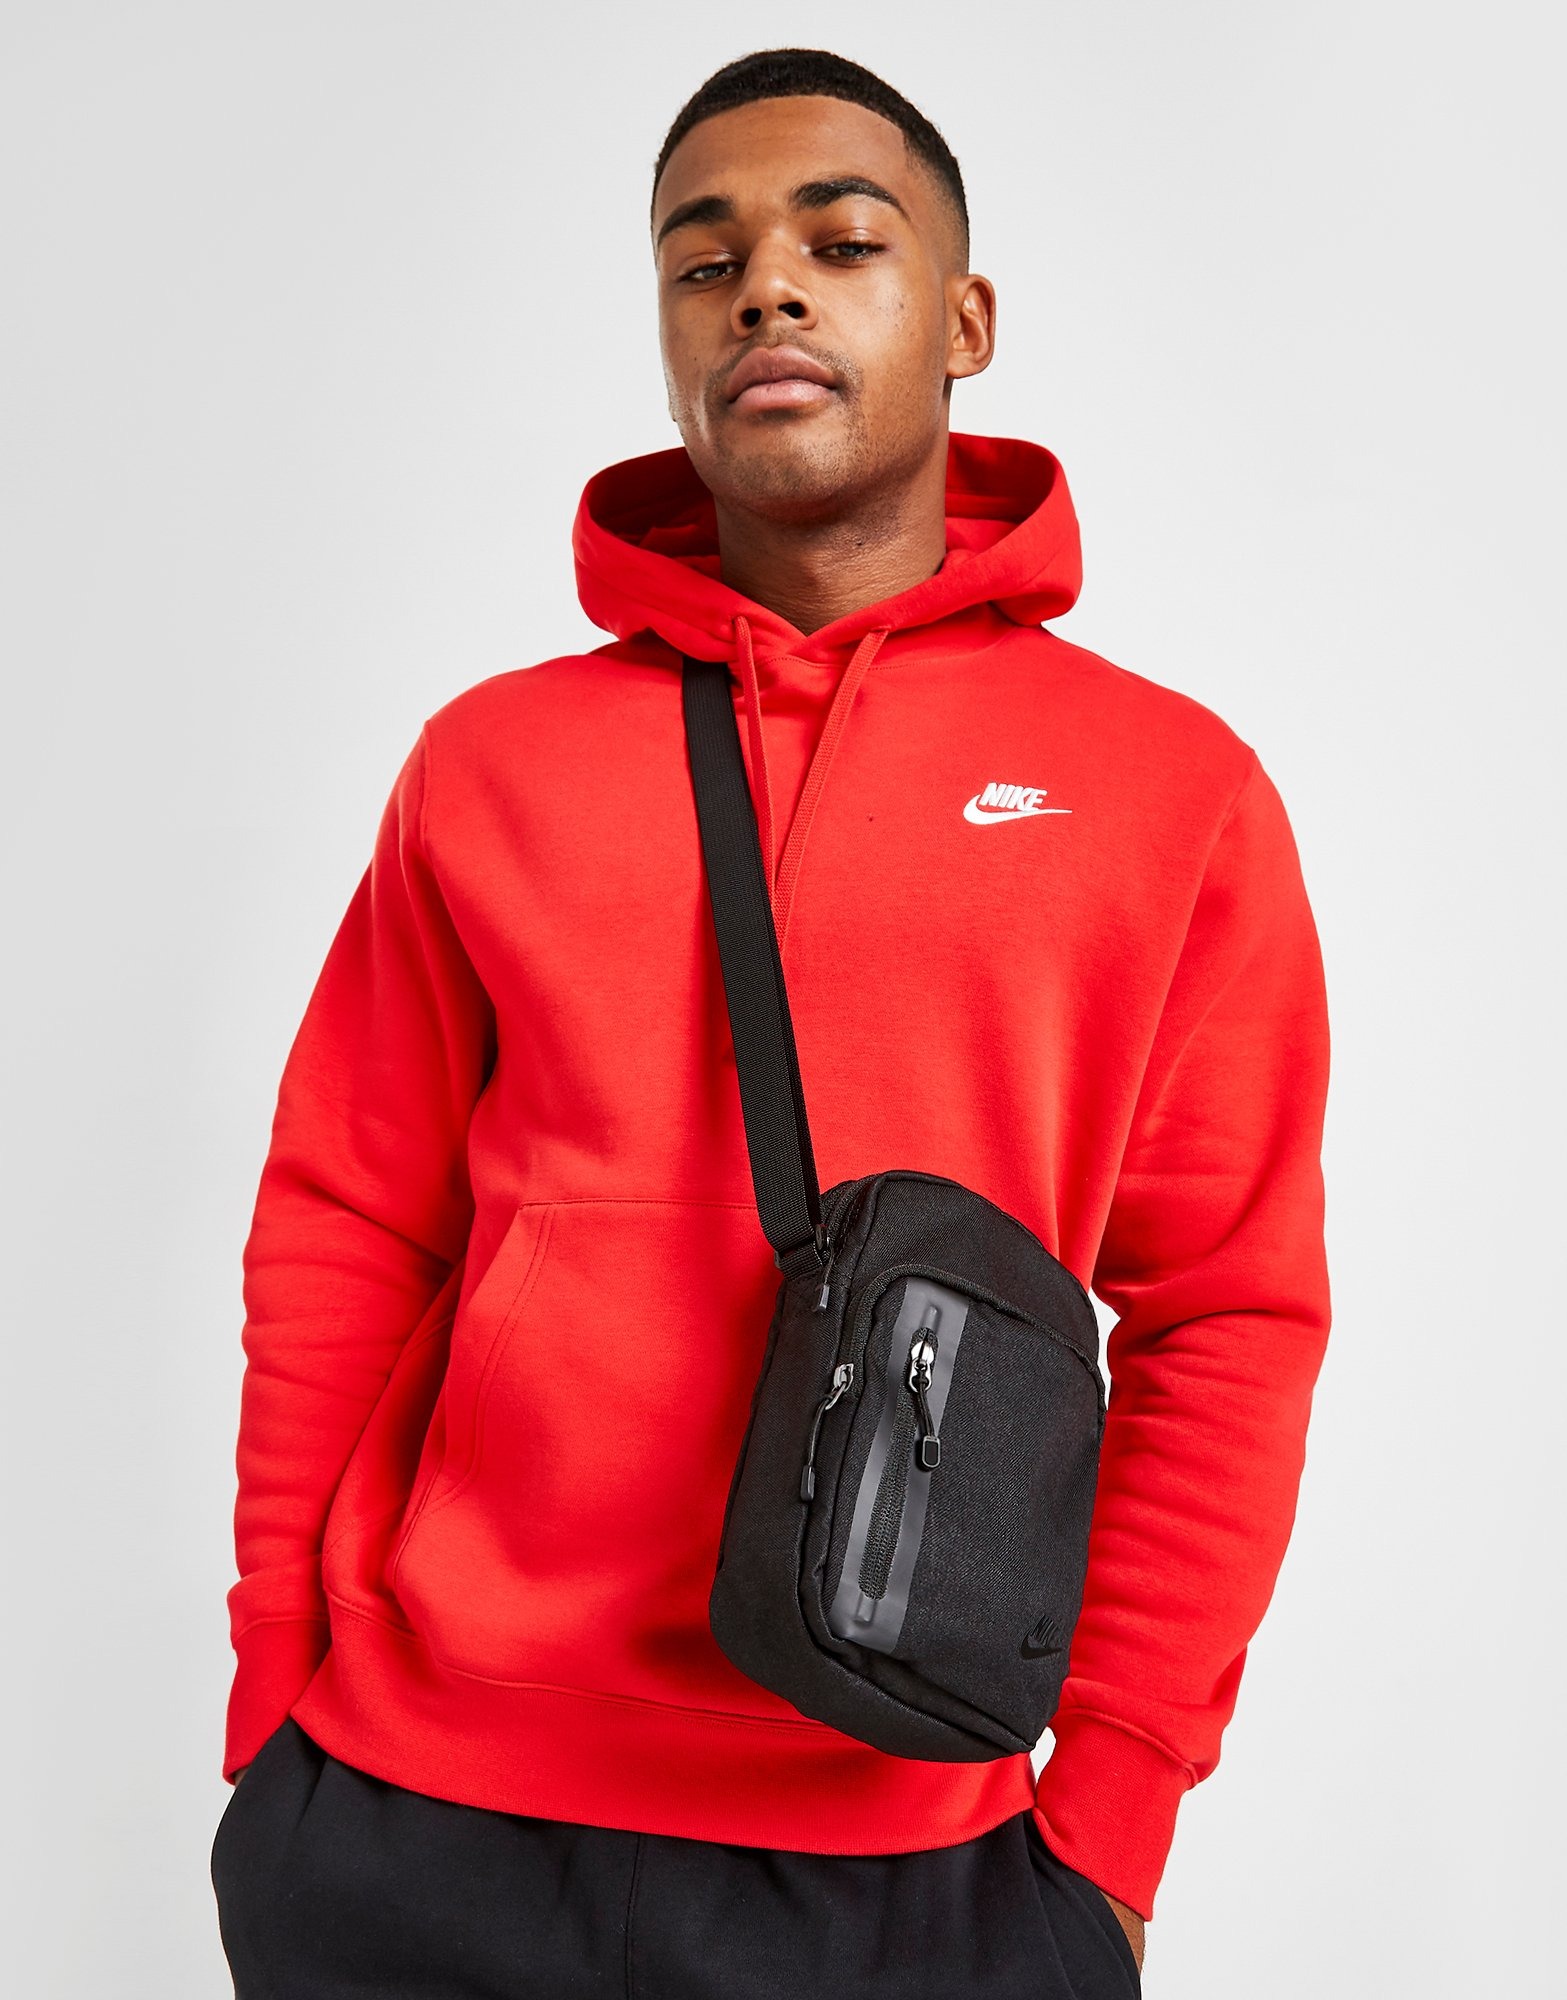 jd sports travel bags